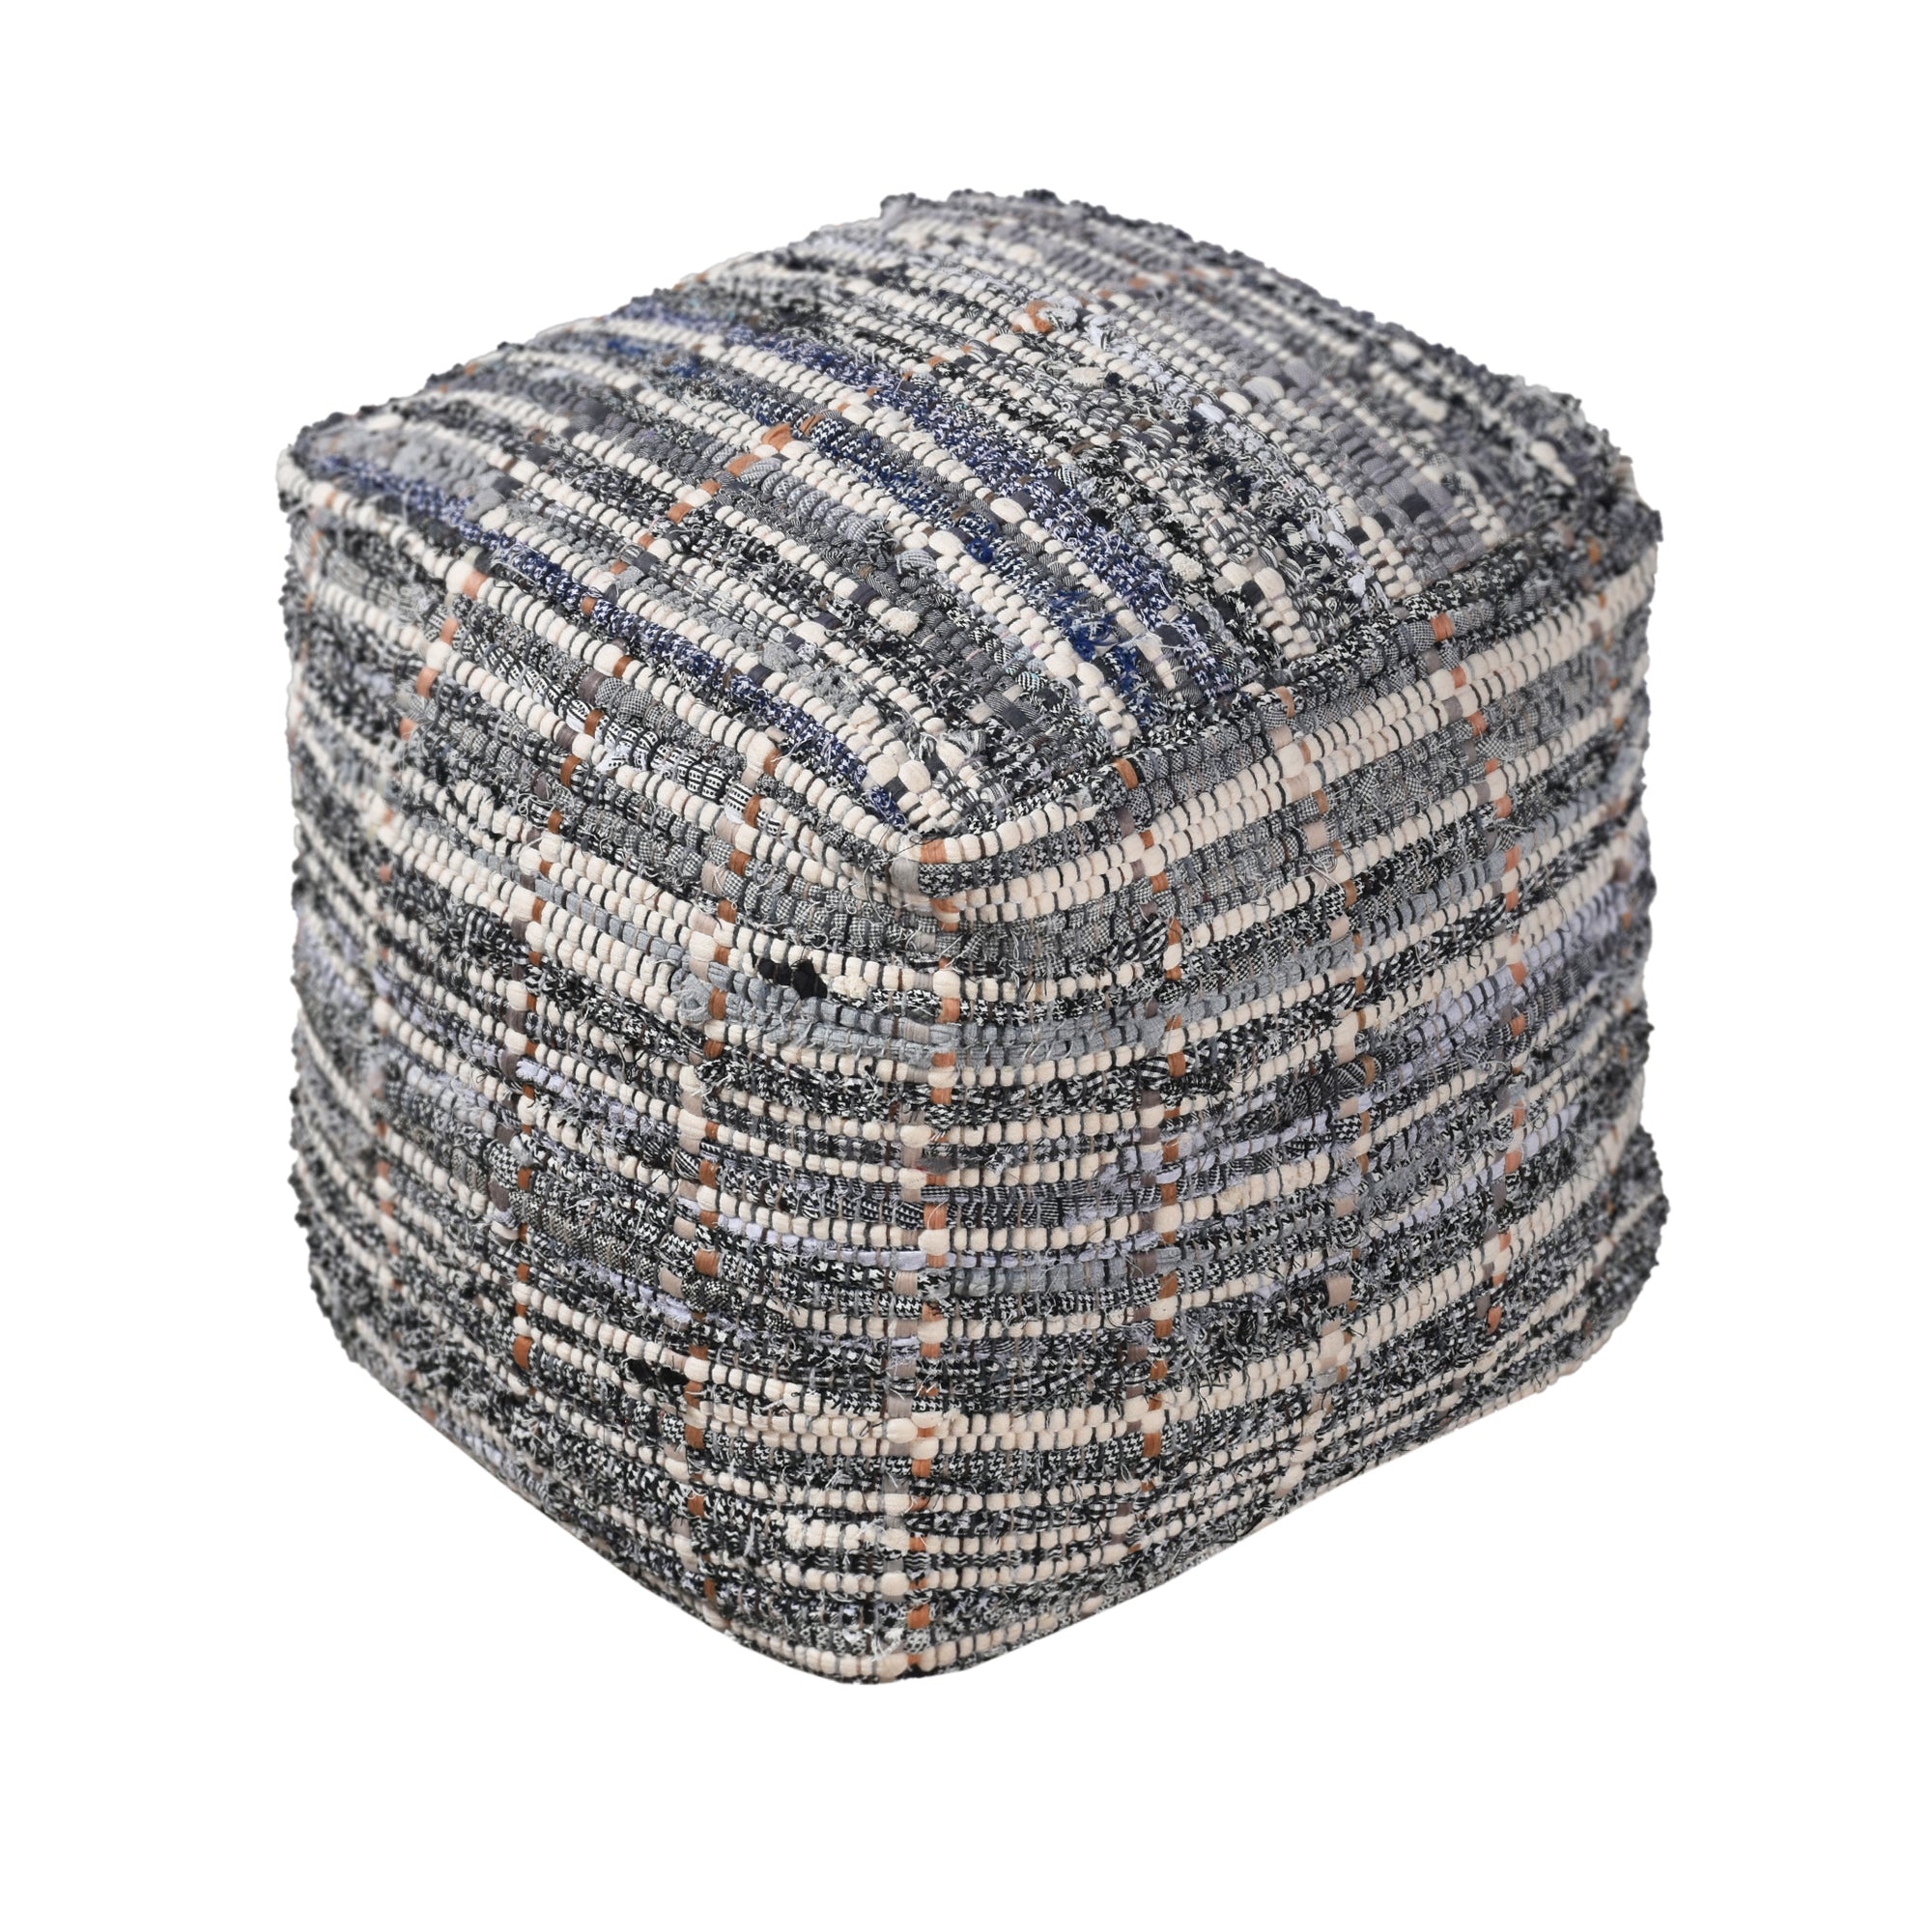 KHERSON POUF - COTTON/ RECYCLED FABRIC